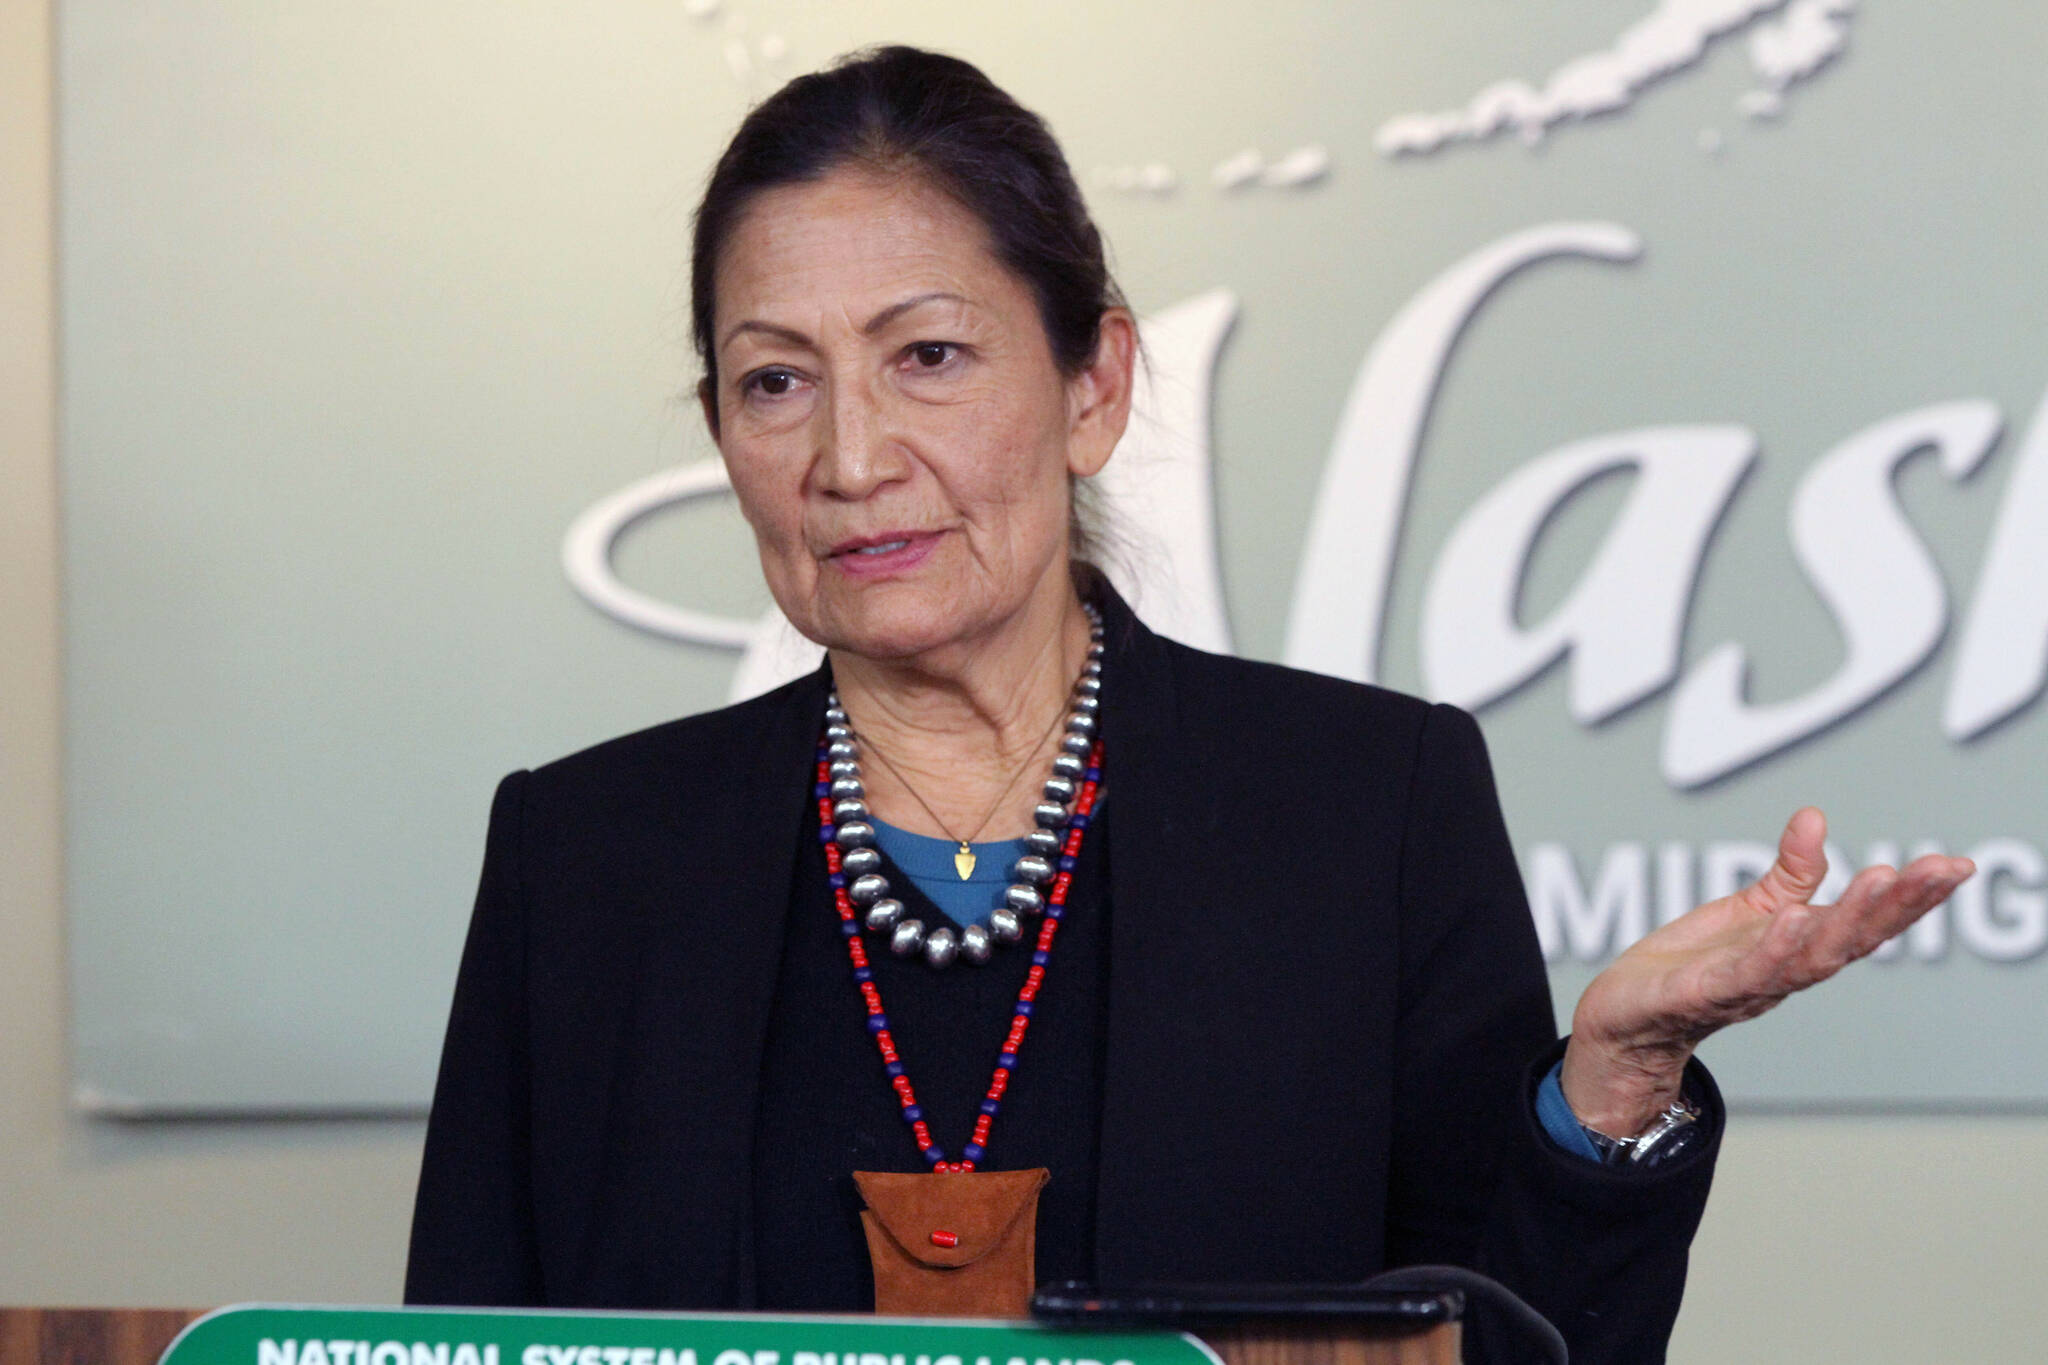 Interior Secretary Deb Haaland gestures while addressing reporters during a news conference Thursday, April 21, 2022, in Anchorage, Alaska. Haaland is in the midst of a visit to the state that included a trip to King Cove, a community at the center of a long-running dispute over a proposed land exchange aimed at building a road through a national wildlife refuge. (AP Photo/Mark Thiessen)